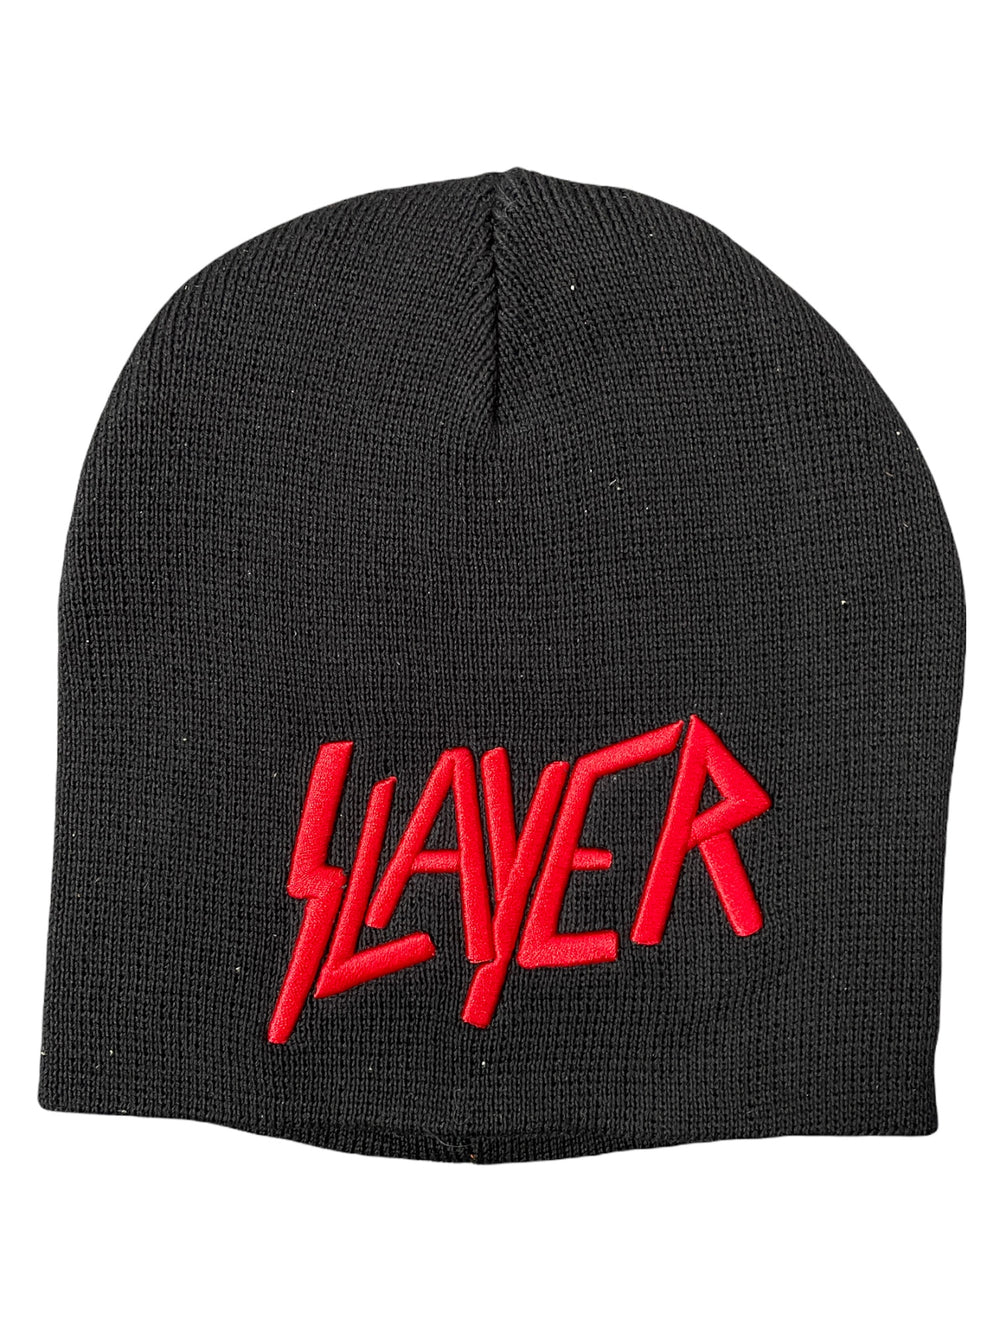 Slayer - Raised Logo Embroidery Official Beanie Hat One Size Fits All NEW